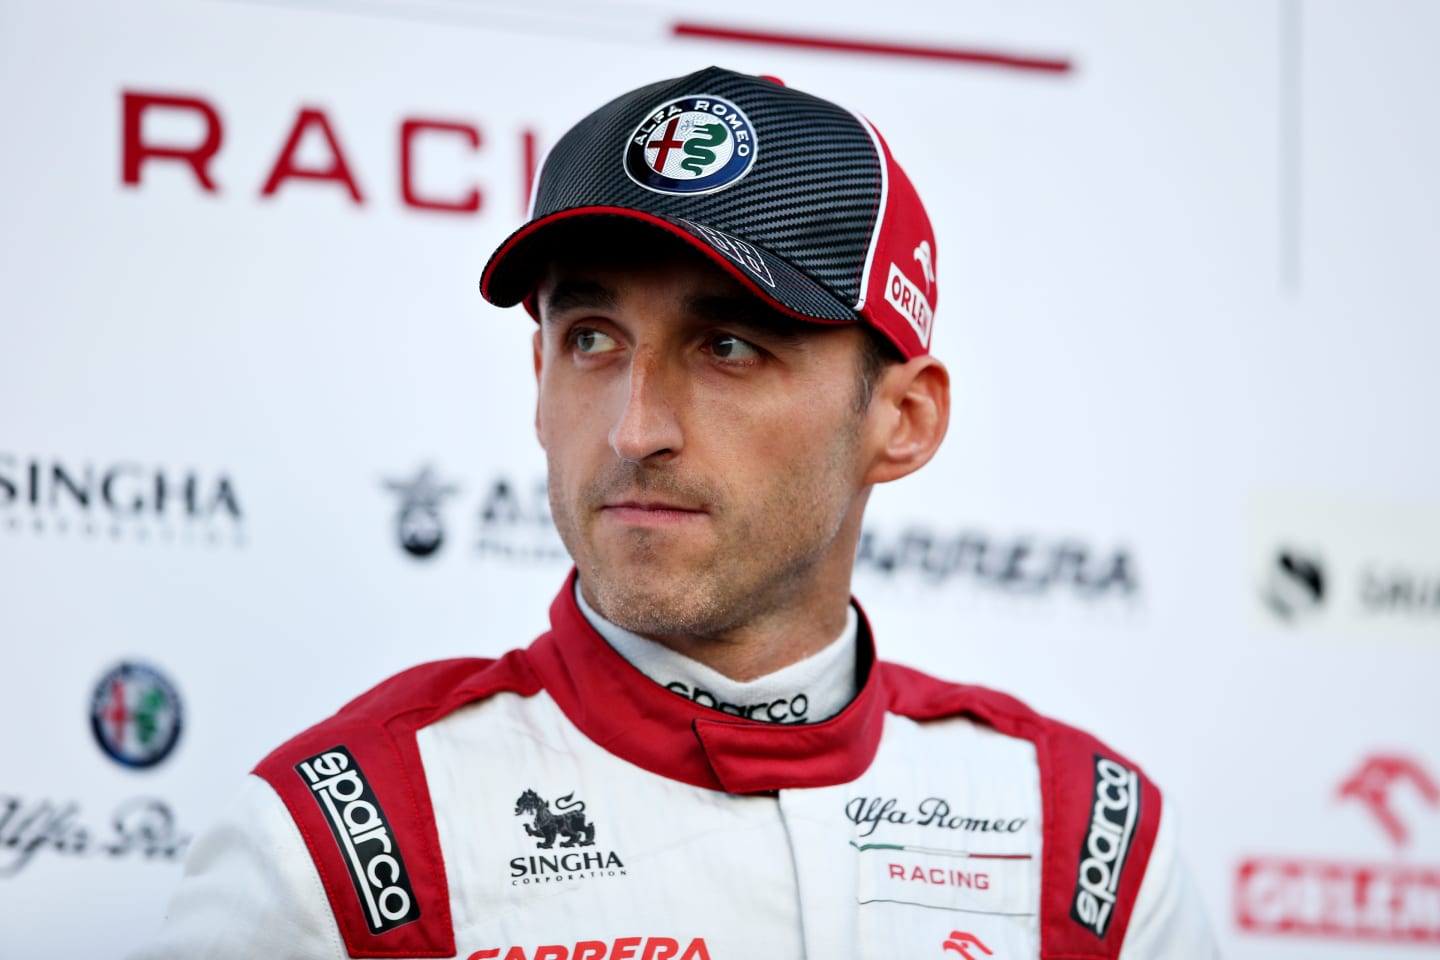 BARCELONA, SPAIN - FEBRUARY 19: Robert Kubica of Poland and Alfa Romeo Racing is pictured at the